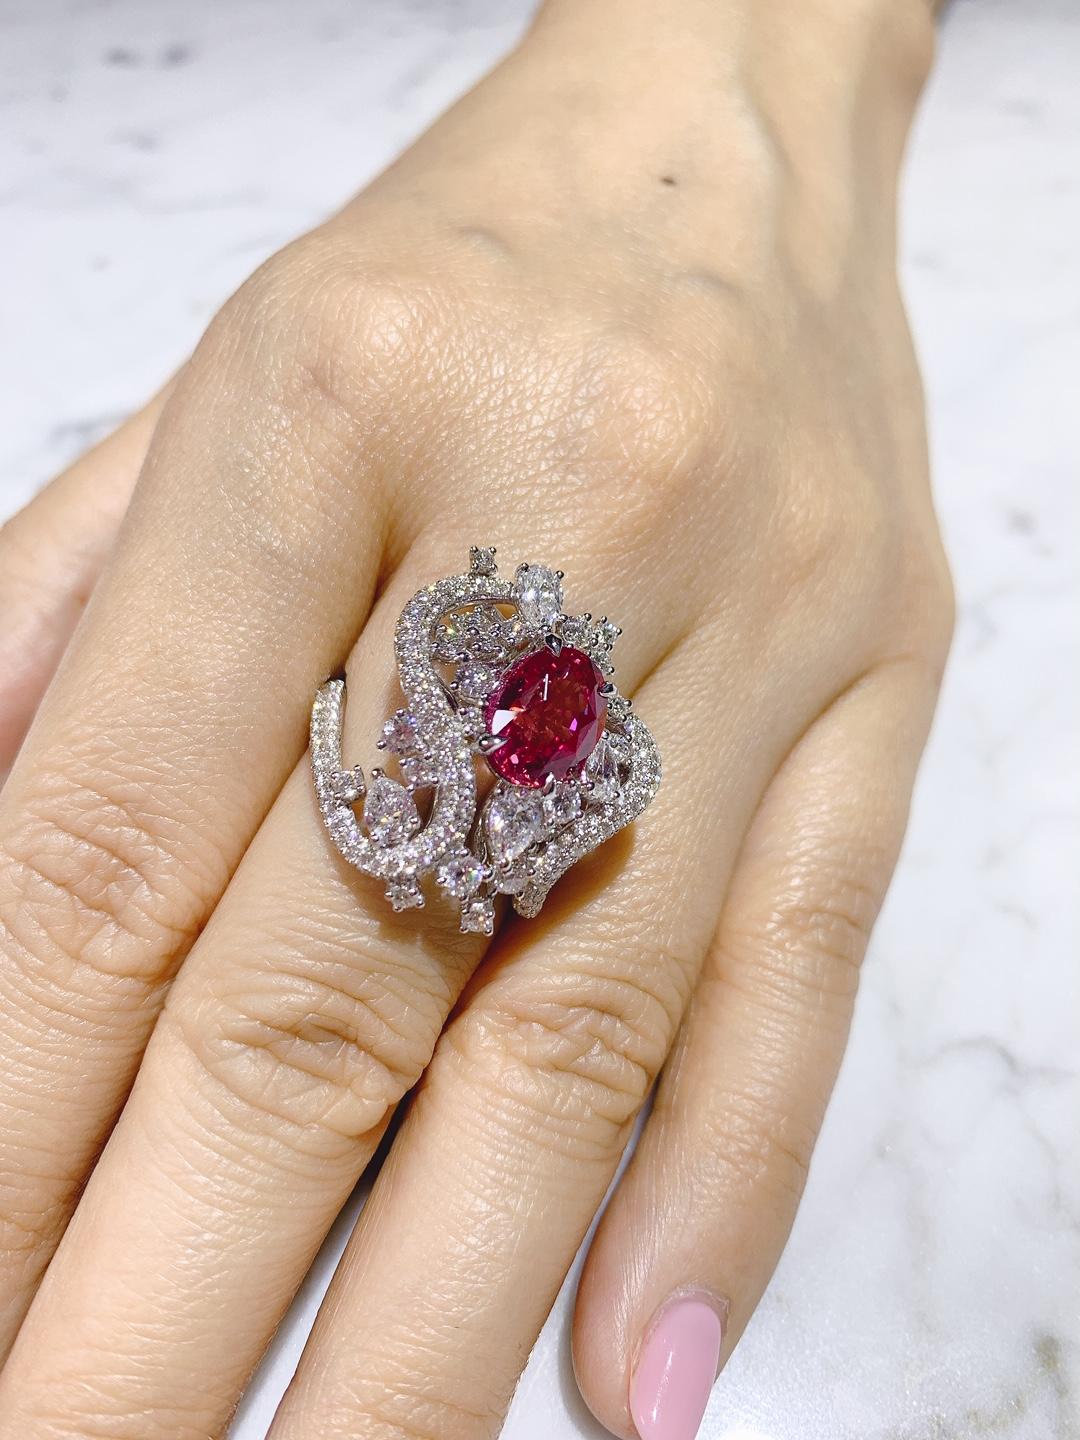 GRS Certified 3.6 Carat Unheated Pink Sapphire Ring from Sri Lanka For Sale 3